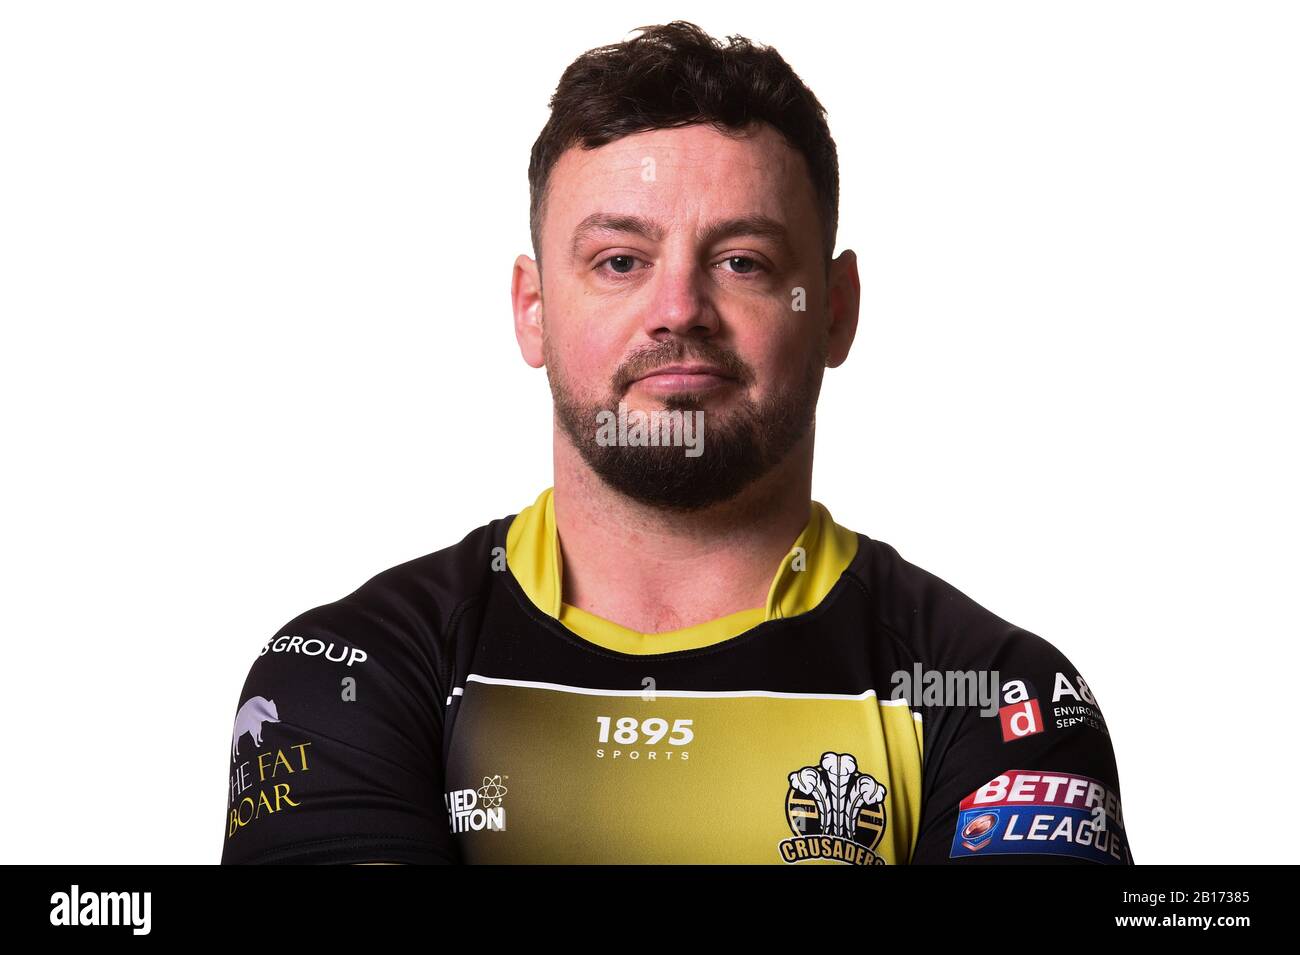 23th February 2020, Queensway Stadium, Wrexham, Wales; North Wales Crusaders, Player Profiles, Ryan Millington of North Wales Crusaders Stock Photo